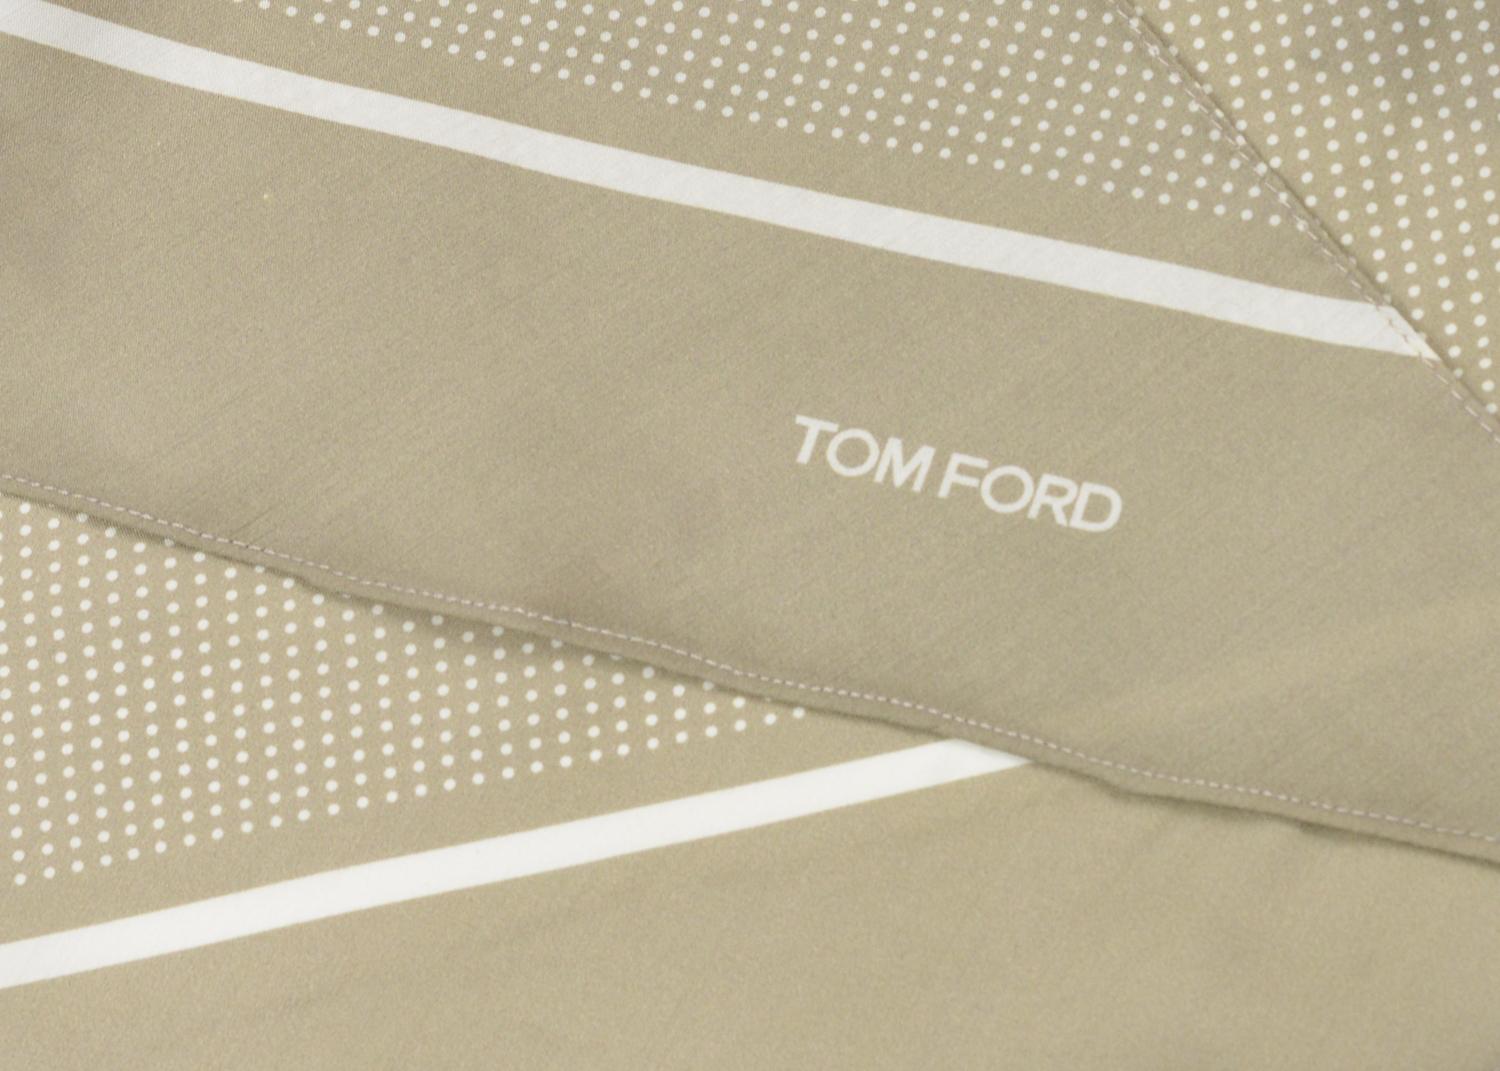 Tom Ford Men's Light Olive Polka Dot Print Angular Edges Silk Scarf In New Condition For Sale In Brooklyn, NY